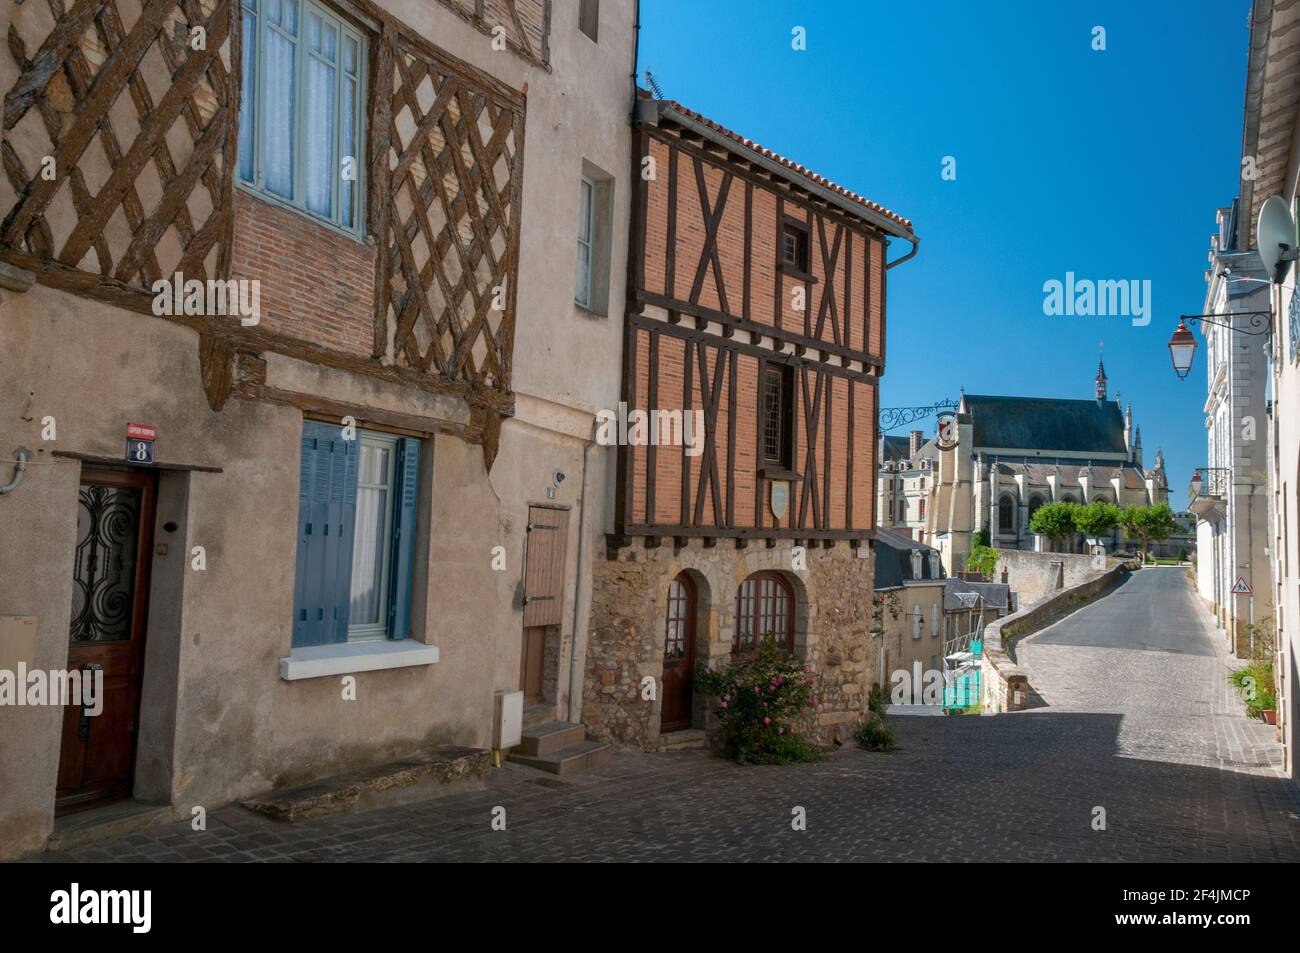 Castle street with timbered houses in Thouars old part of town, Deux-Sevres, Nouvelle-Aquitaine region, France Stock Photo